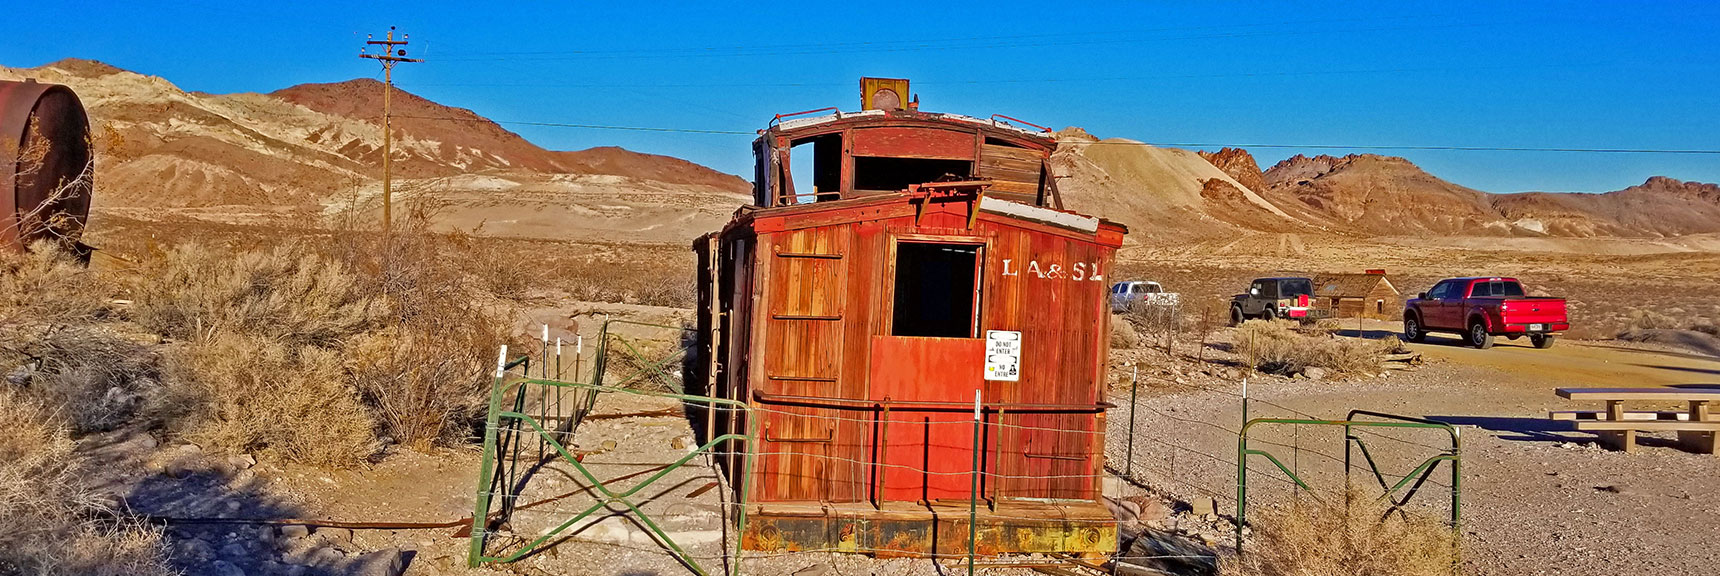 Caboose House at Train Depot | Rhyolite Ghost Town | Death Valley Area, Nevada